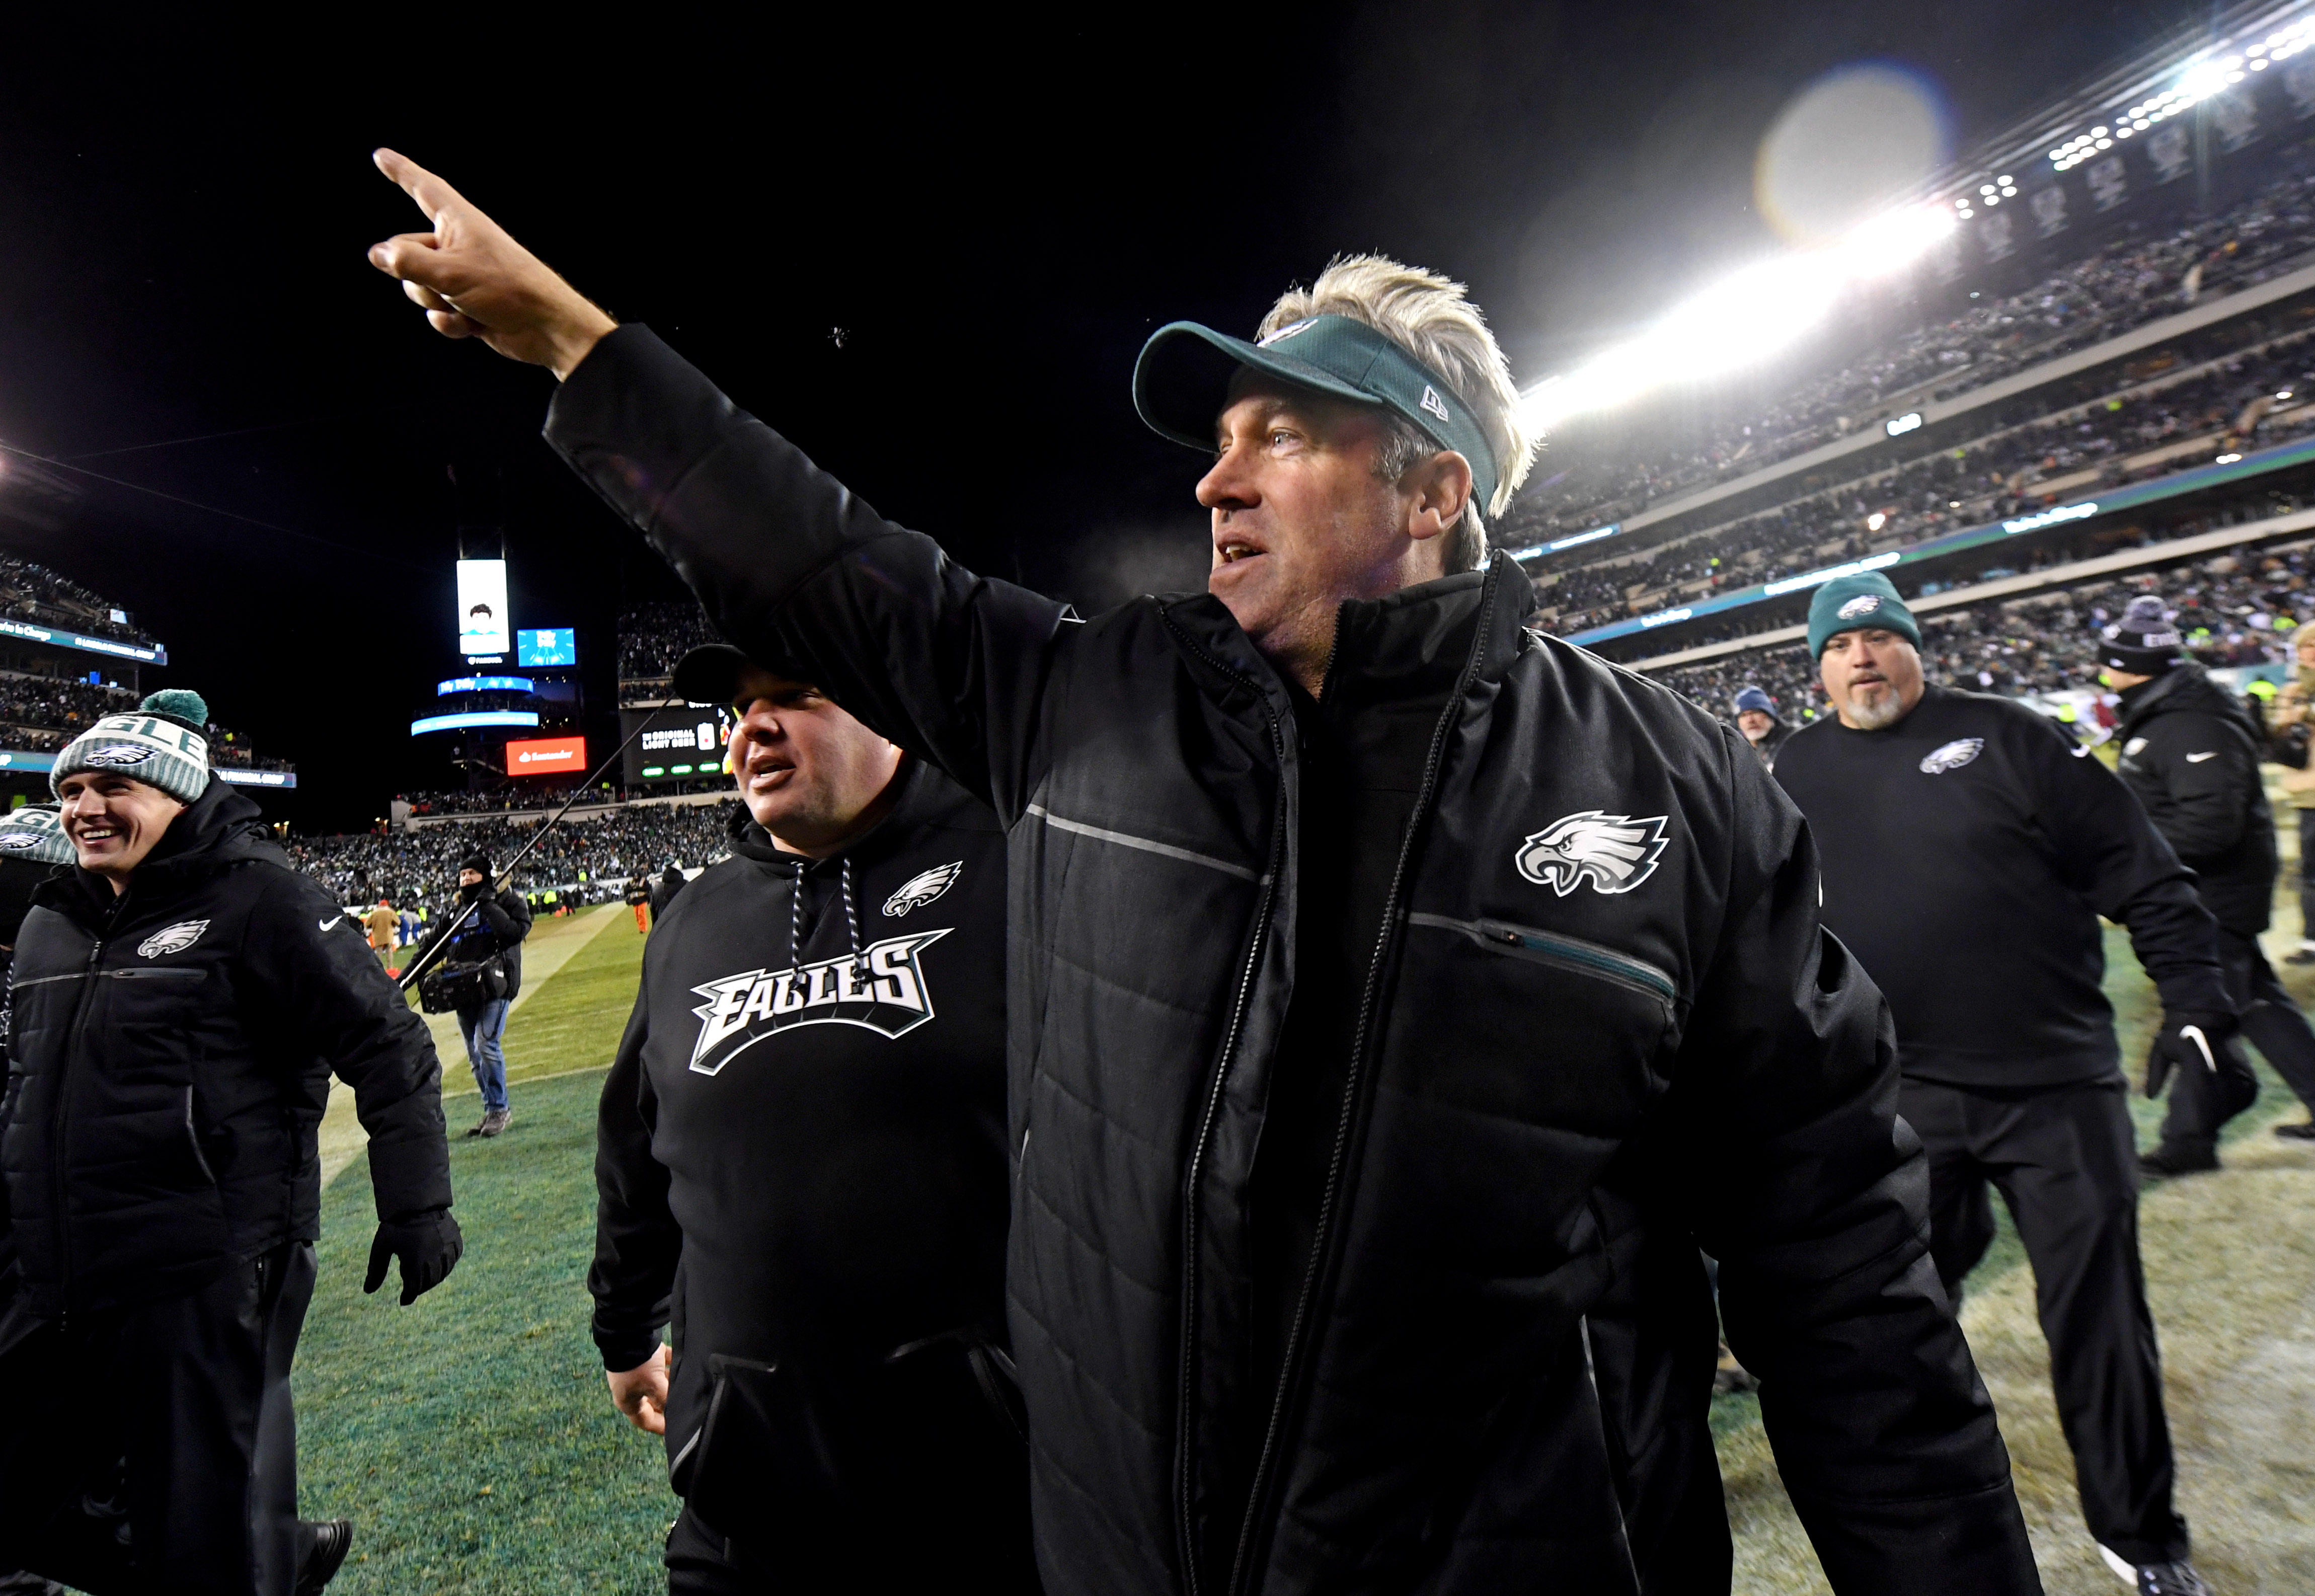 Doug Pederson Is the Ultimate Underdog